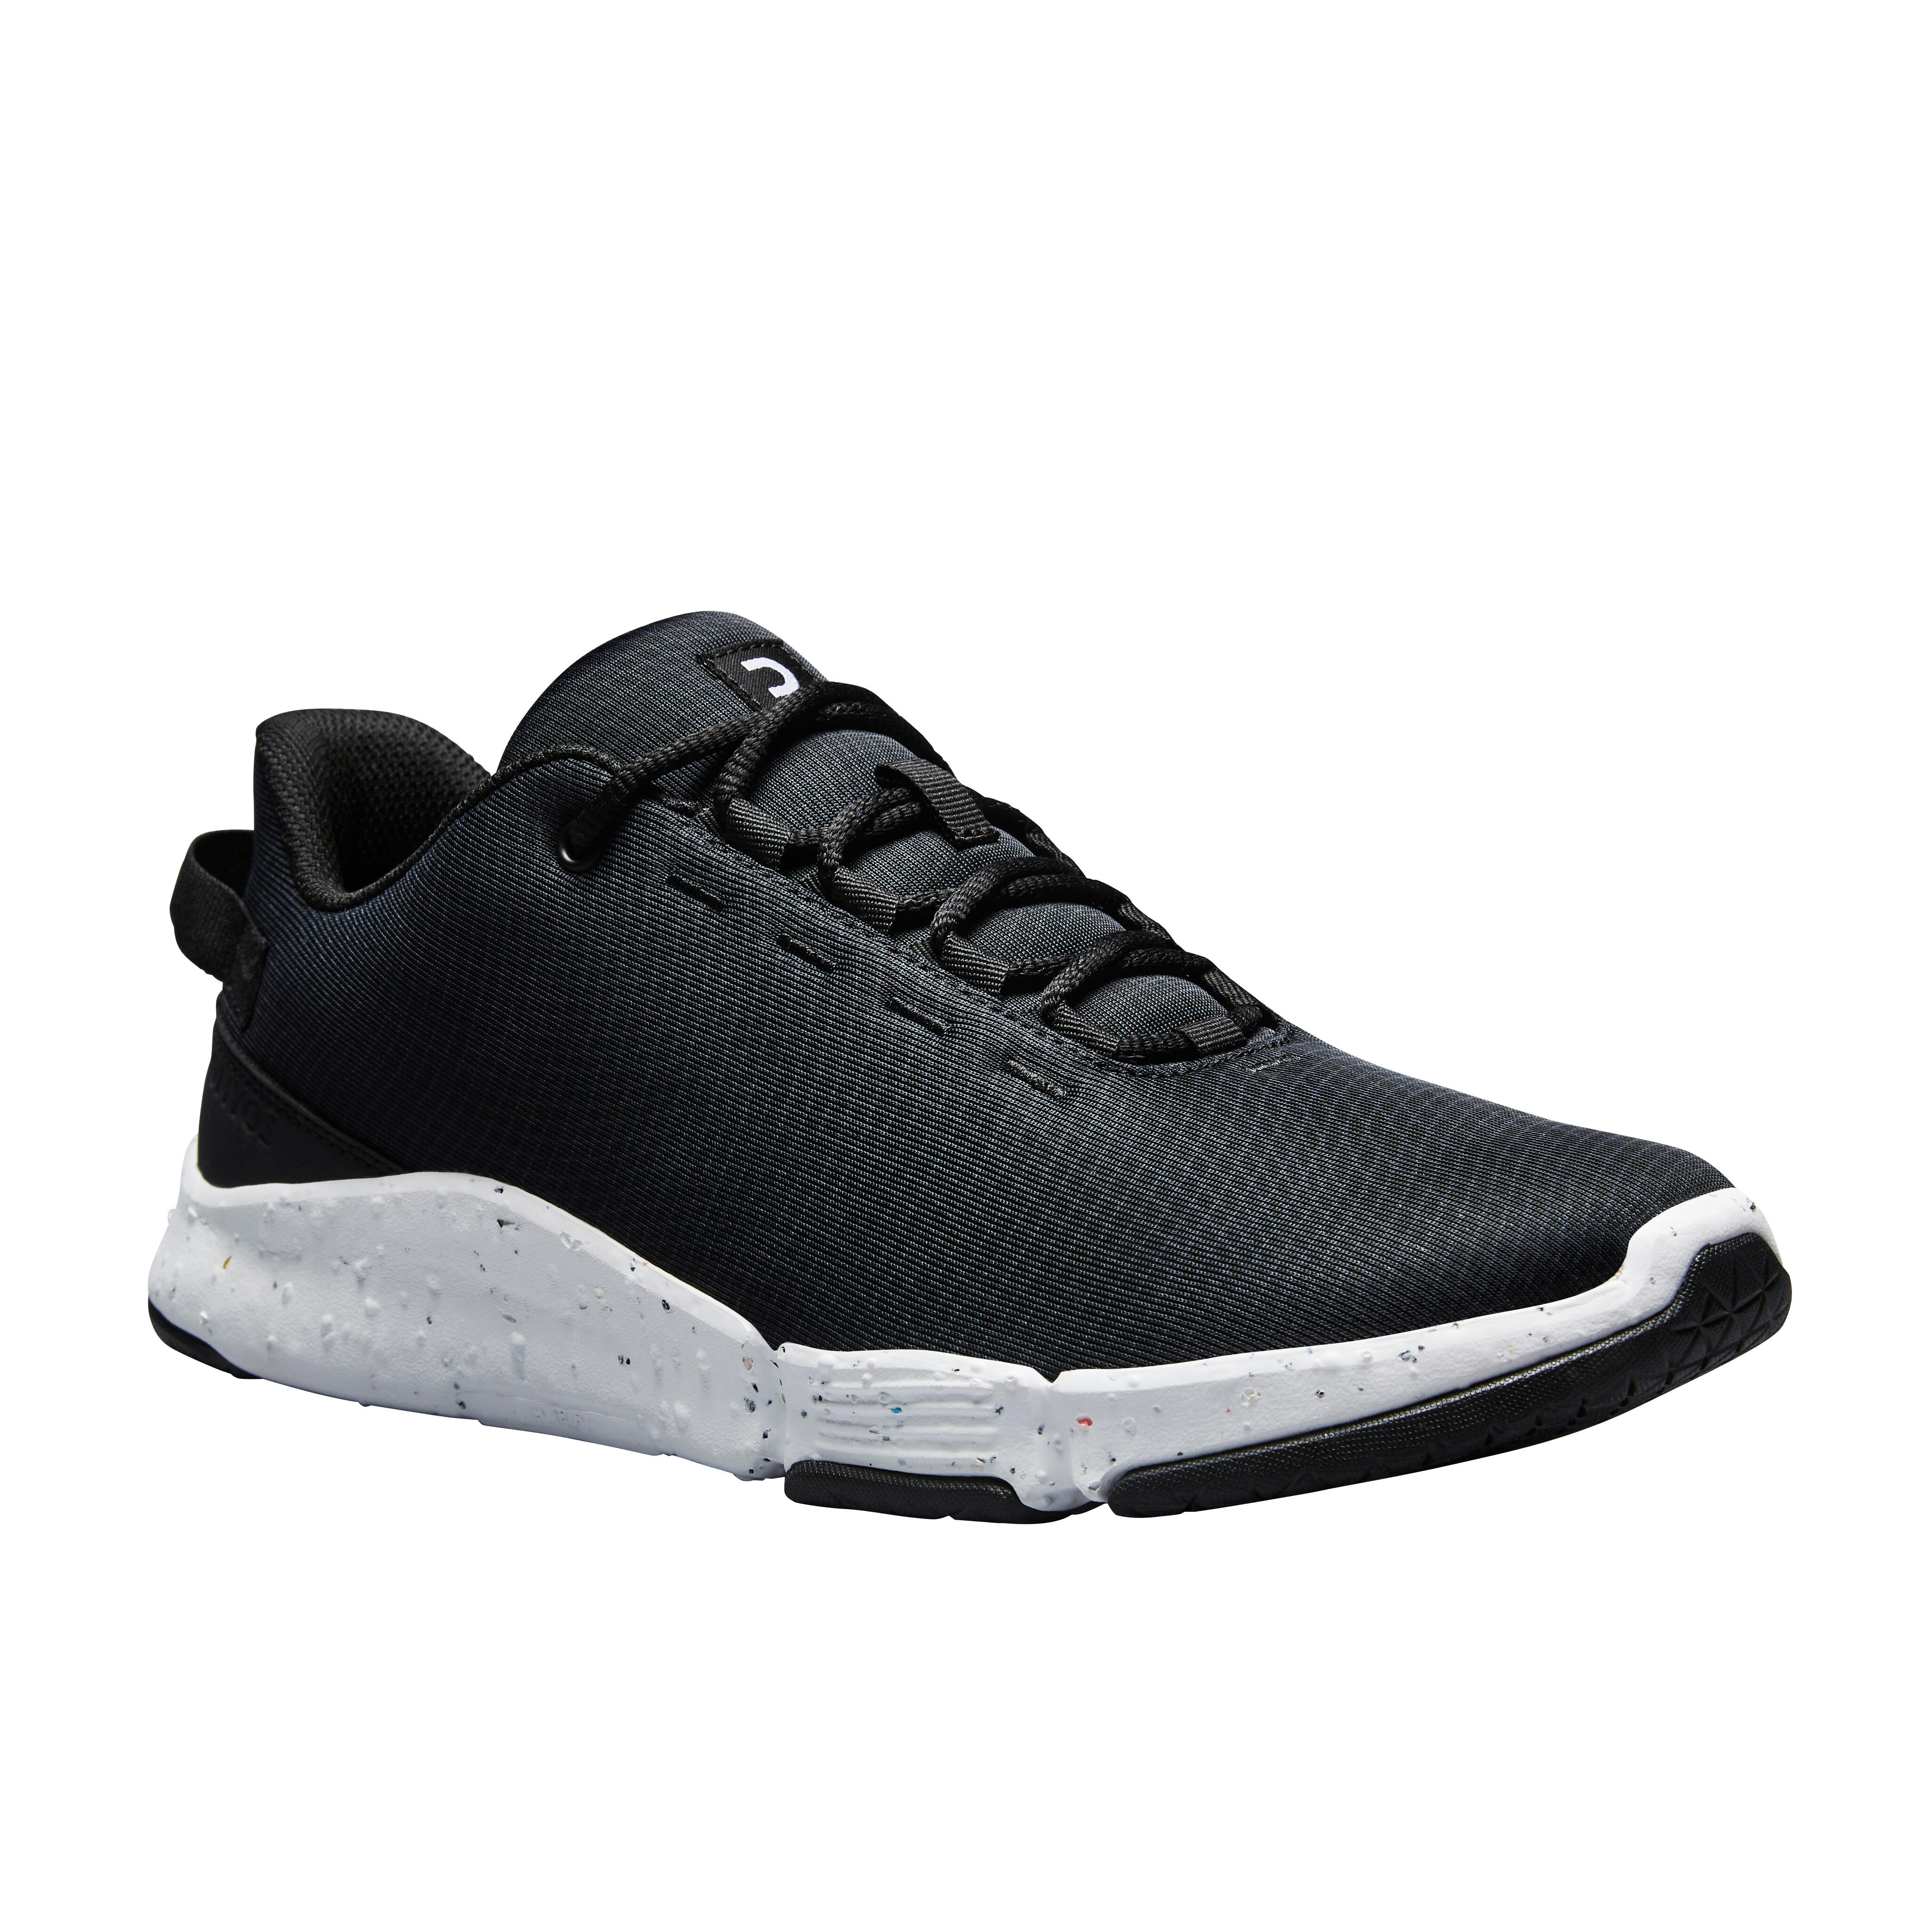 Designer Mens Kalenji Running Shoes Lightweight, Shock Absorbing, And  Fashionable From Zw35255ww2, $43.97